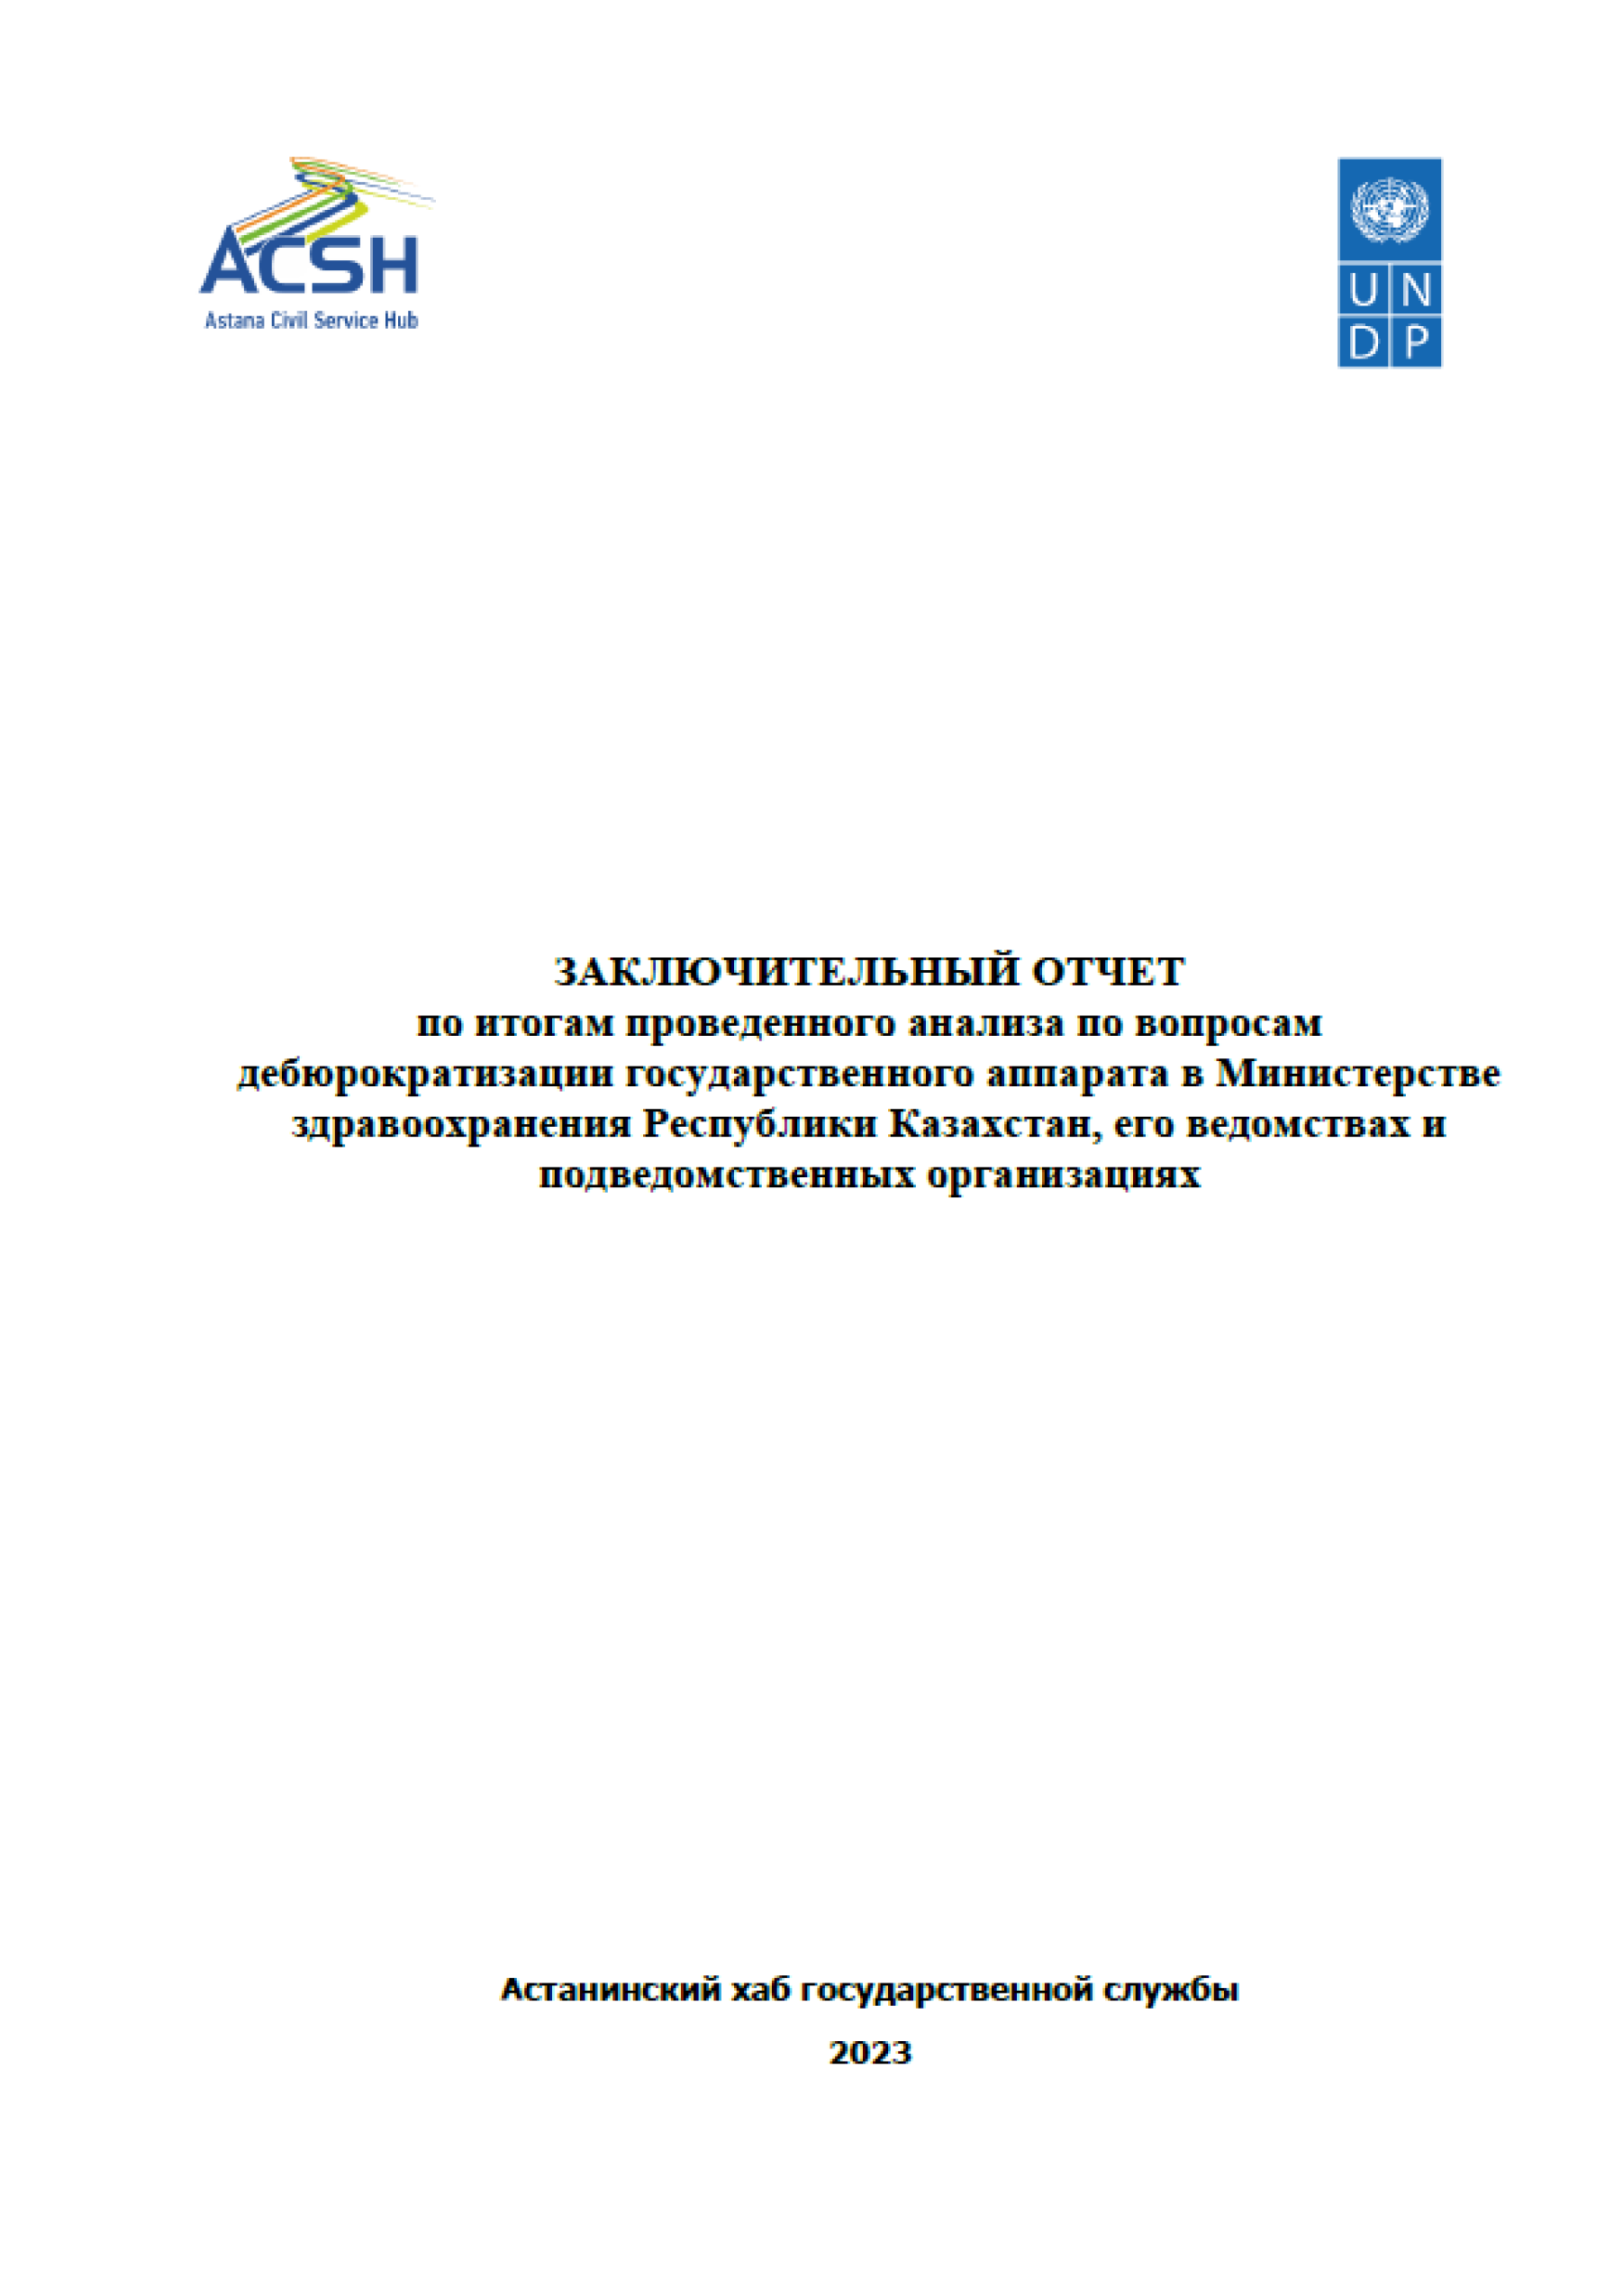 Final report on the results of the analysis carried out on the issues of de-bureaucratization of the state apparatus in the Ministry of Health of the Republic of Kazakhstan, its departments, and subordinate organizations